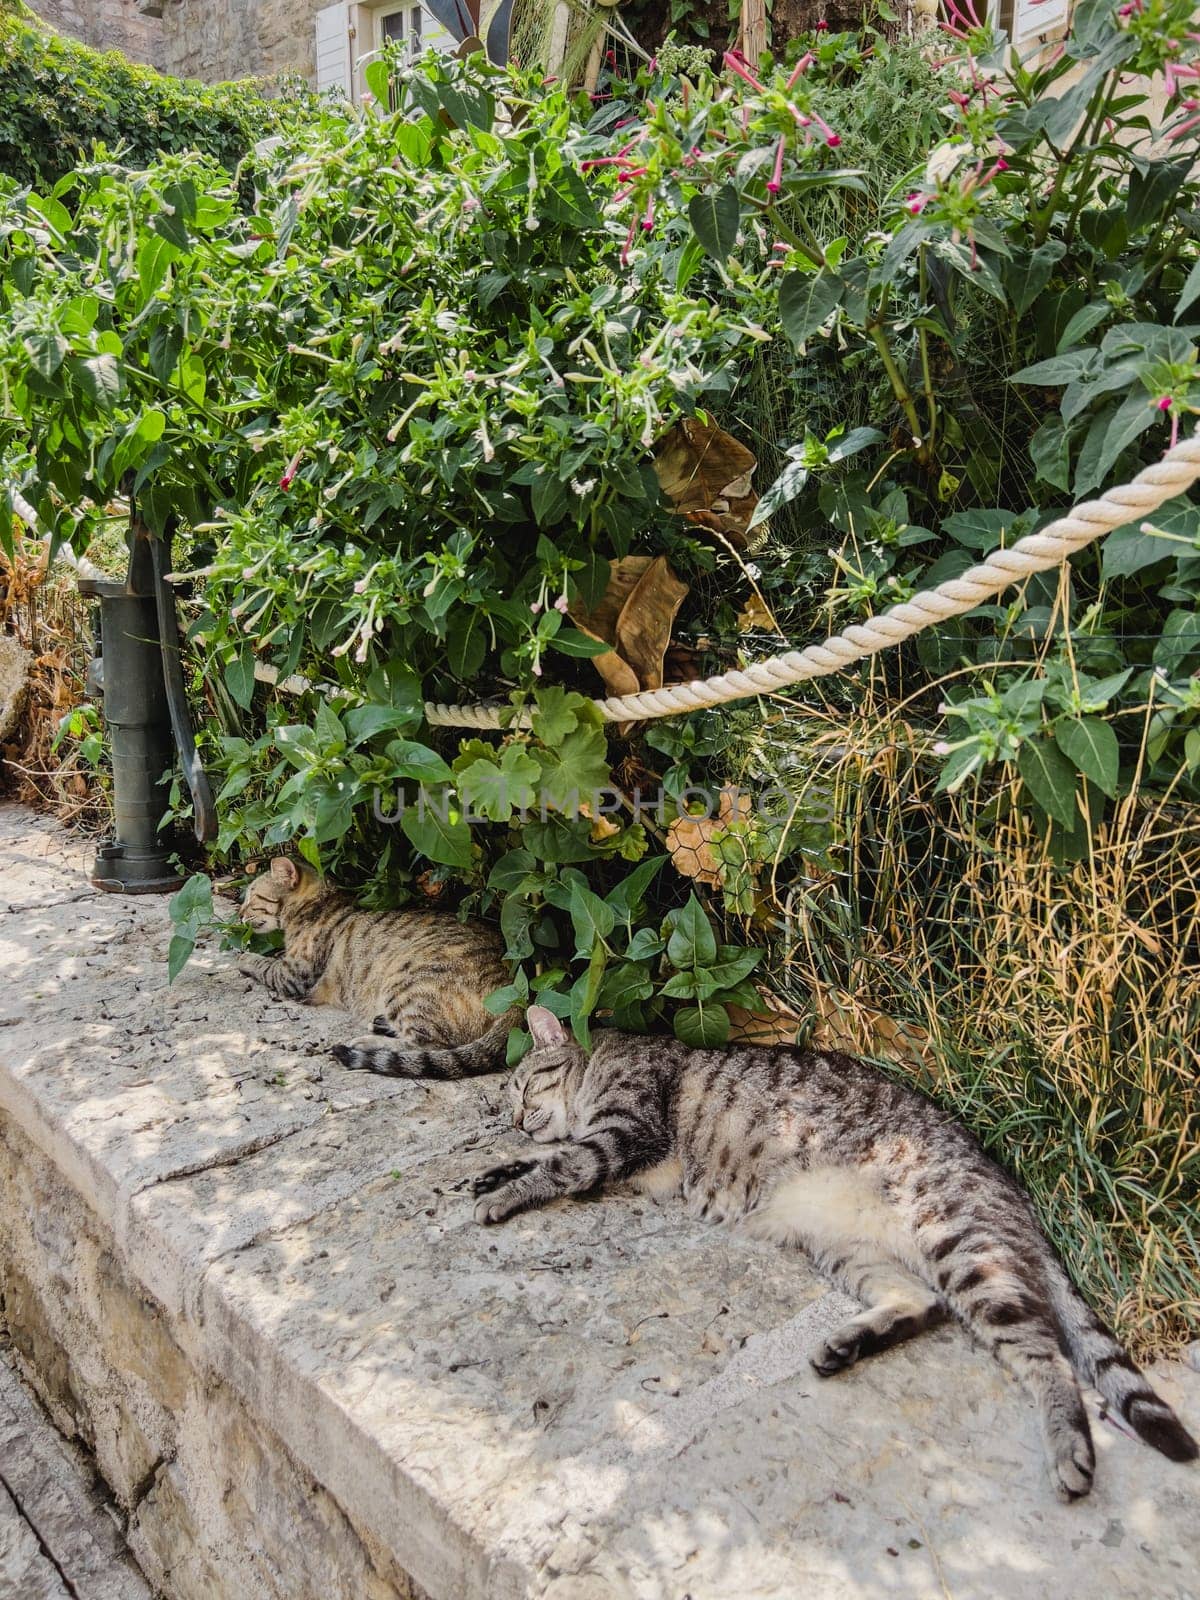 Striped cats sleep on a stone fence near green bushes by Nadtochiy